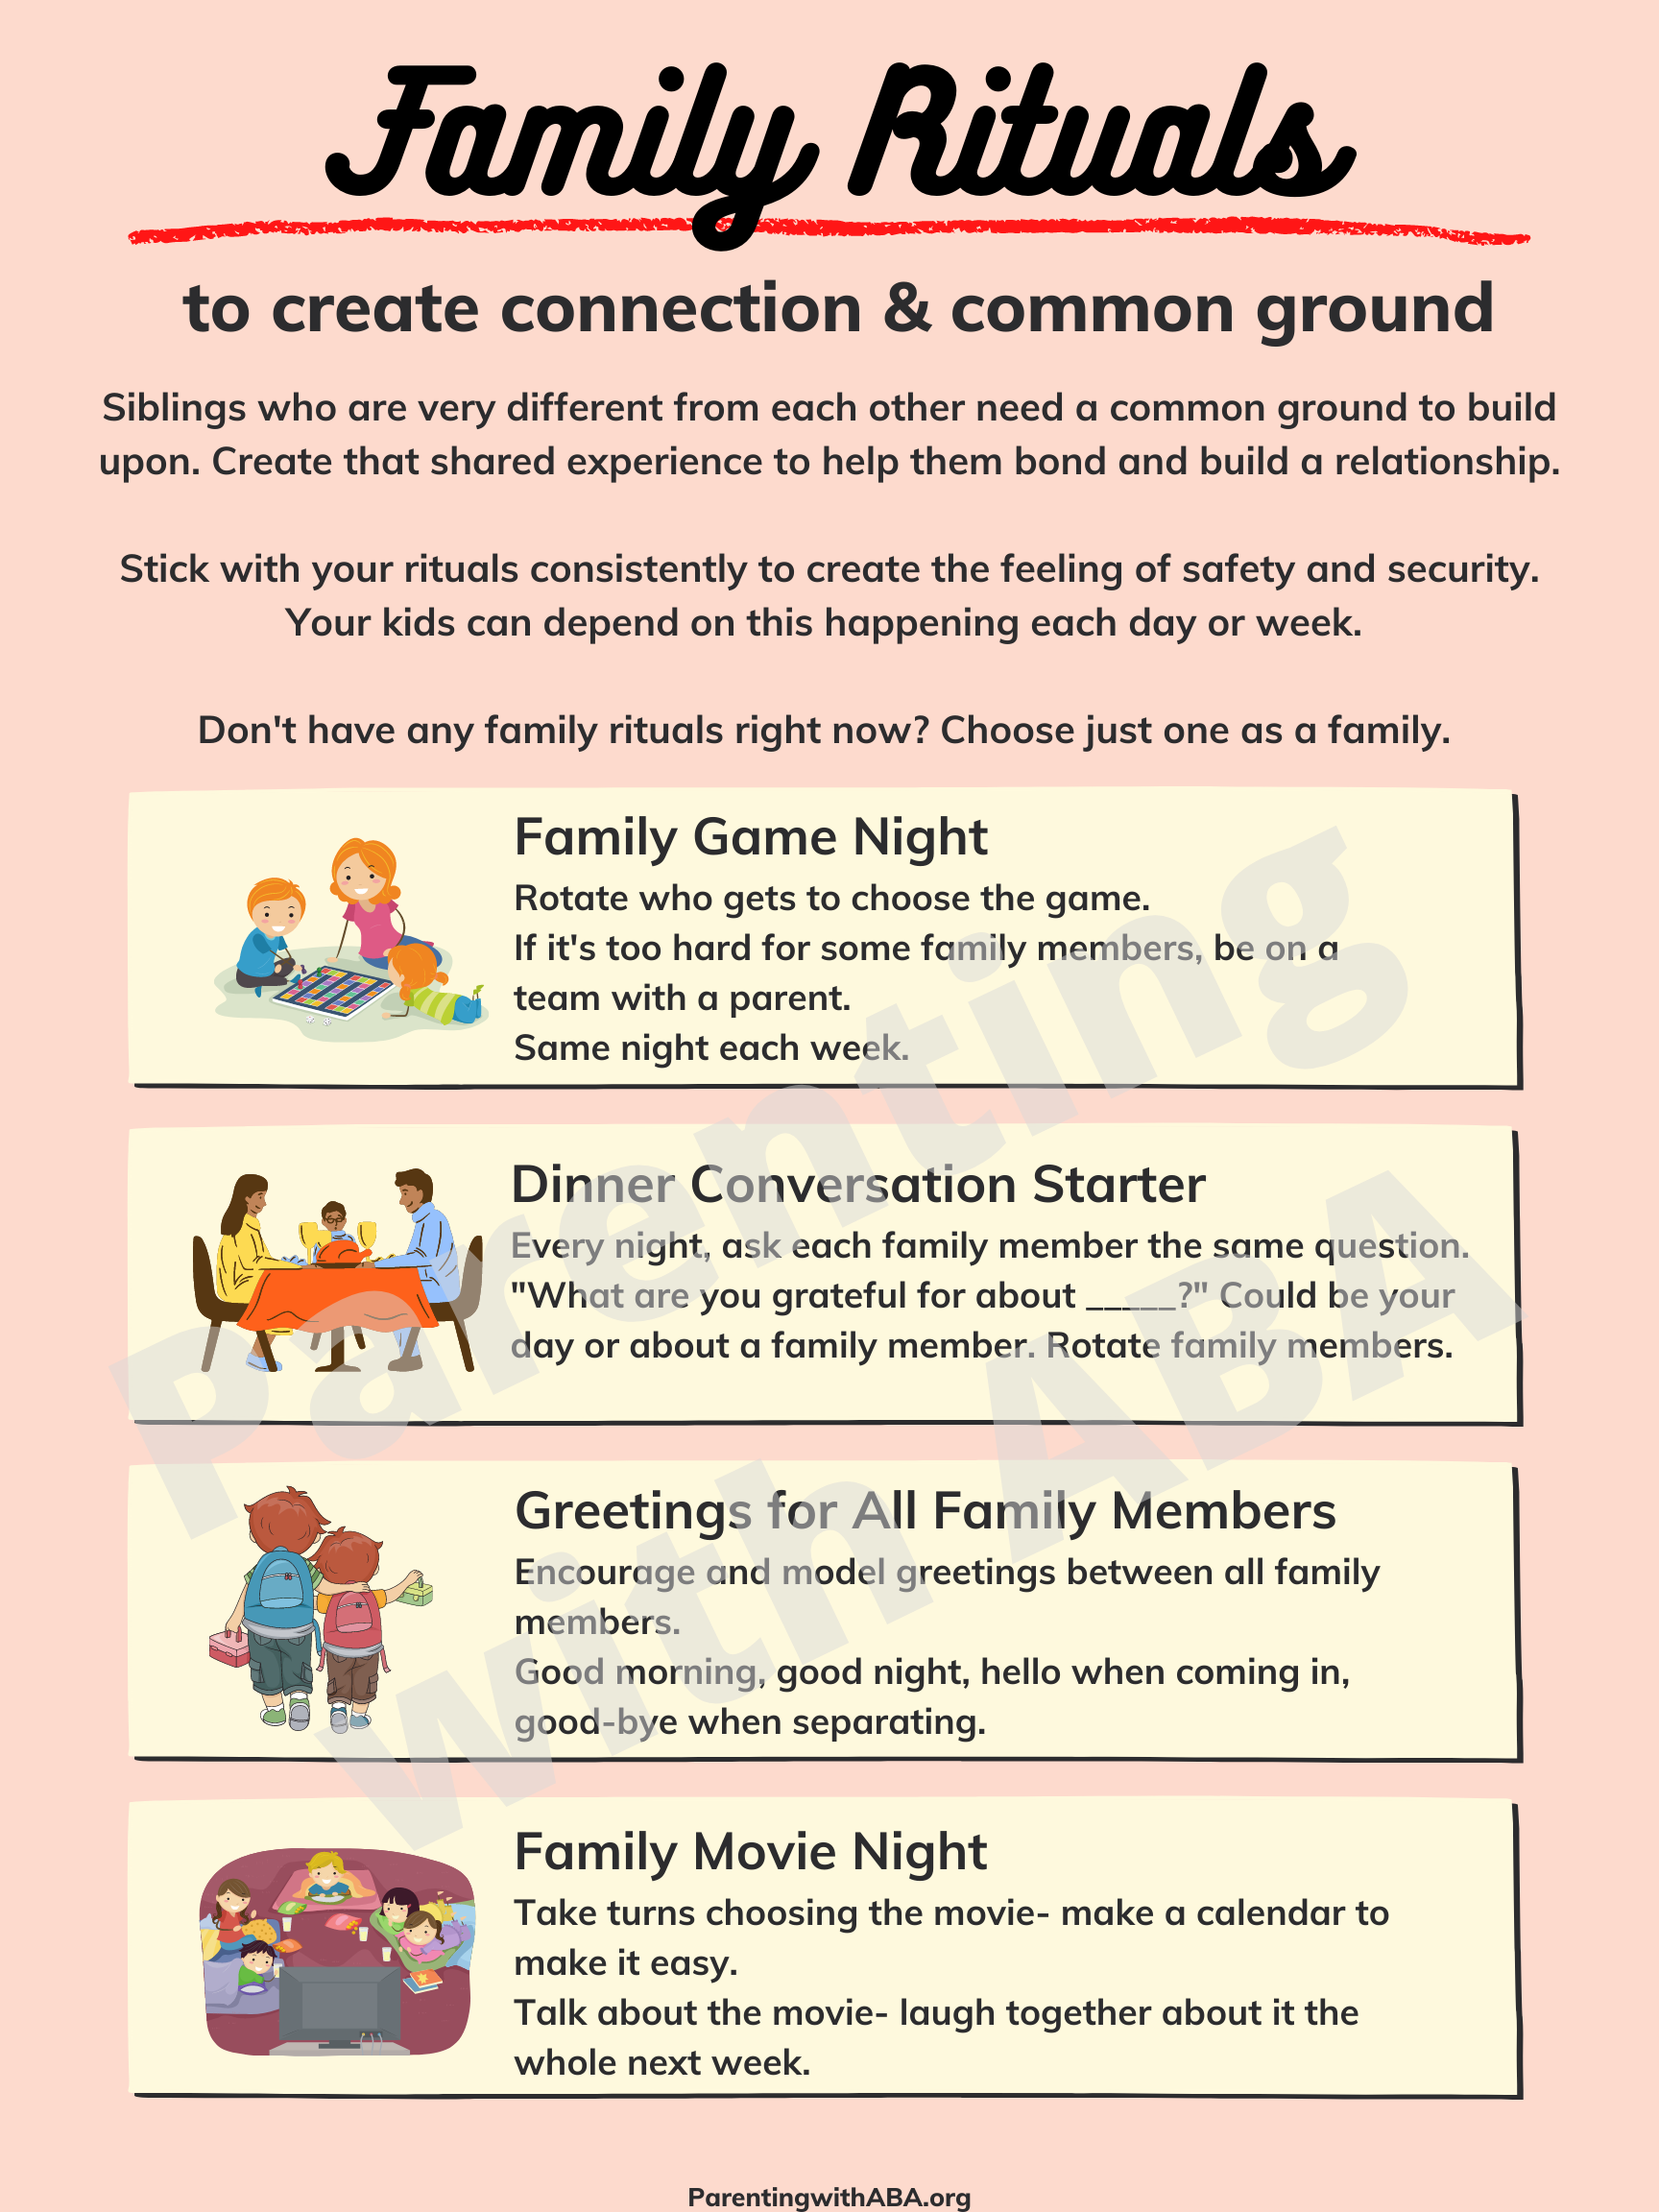 Infographic about the family rituals listed here